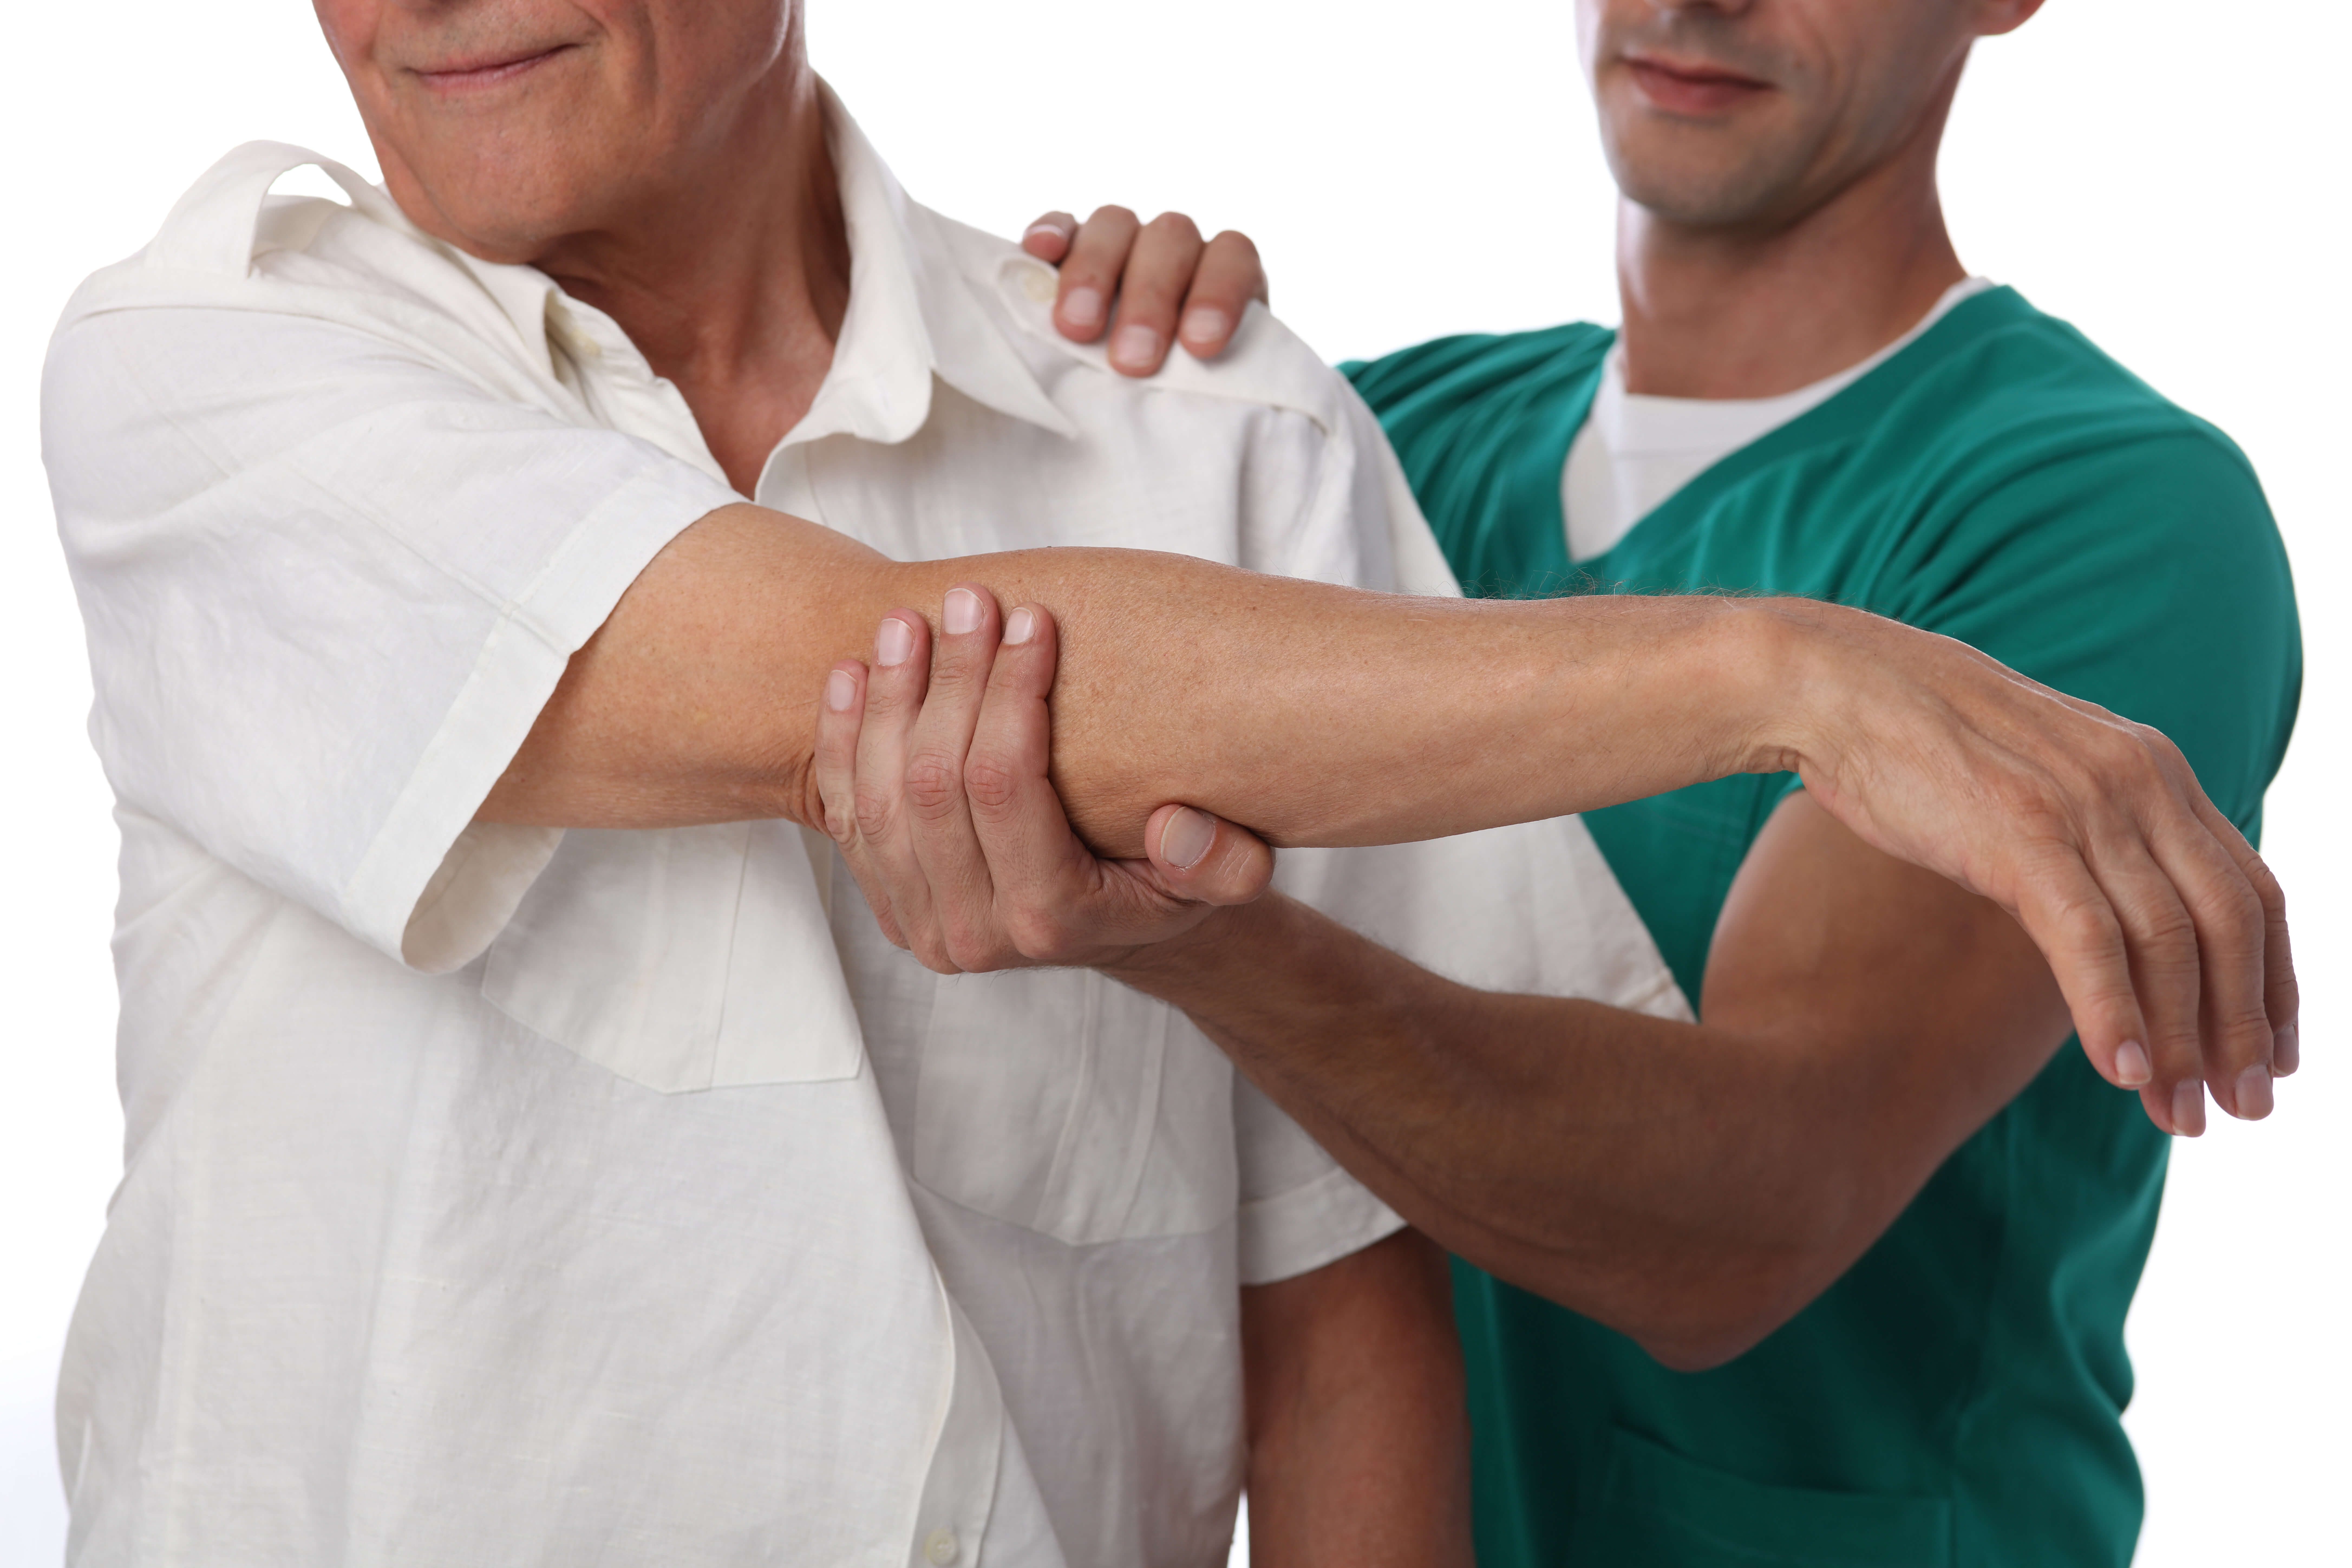 These treatment options can help reduce your shoulder pain